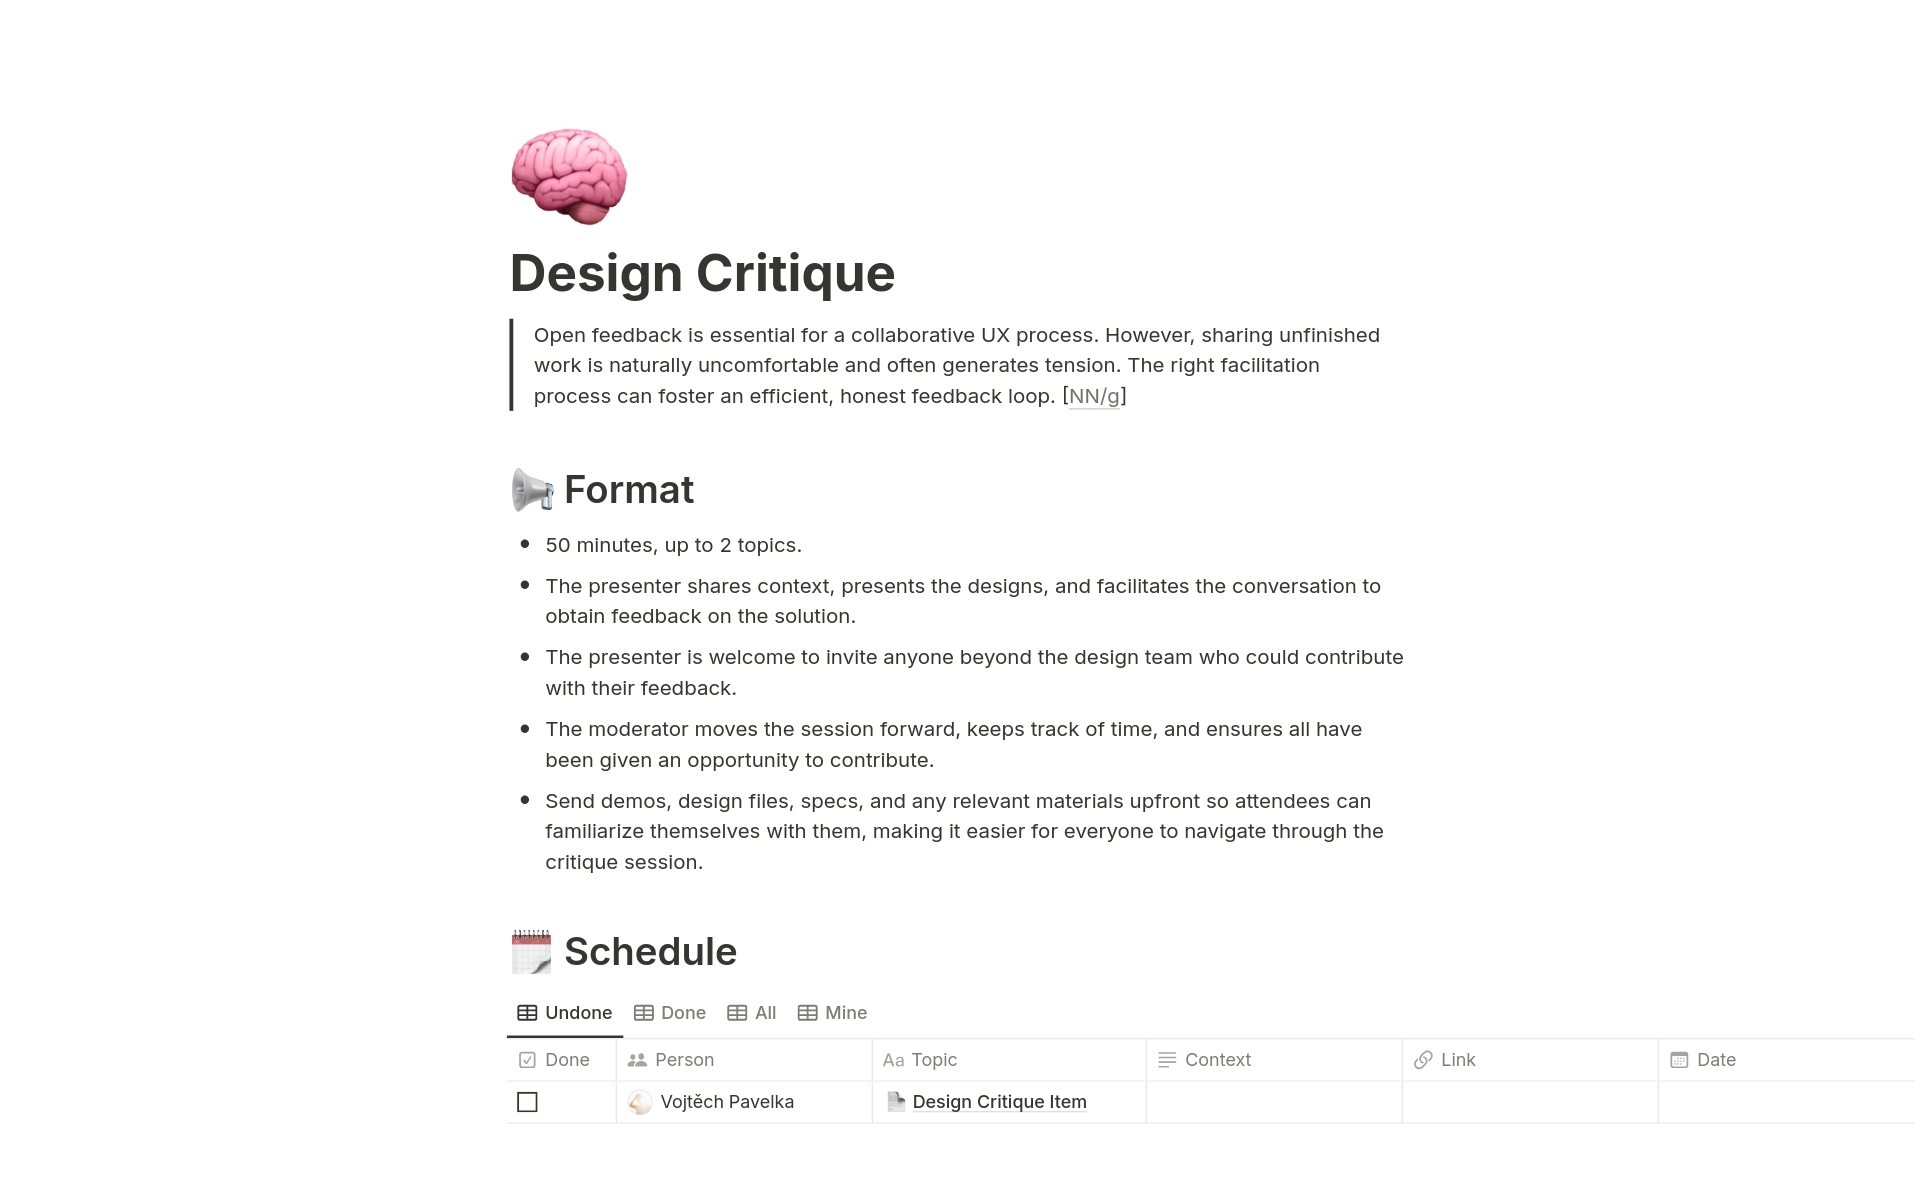 Use this Design Critique Library template as a guide for you and your team to create a baseline understanding of the process and increase the effectiveness of design critique sessions.